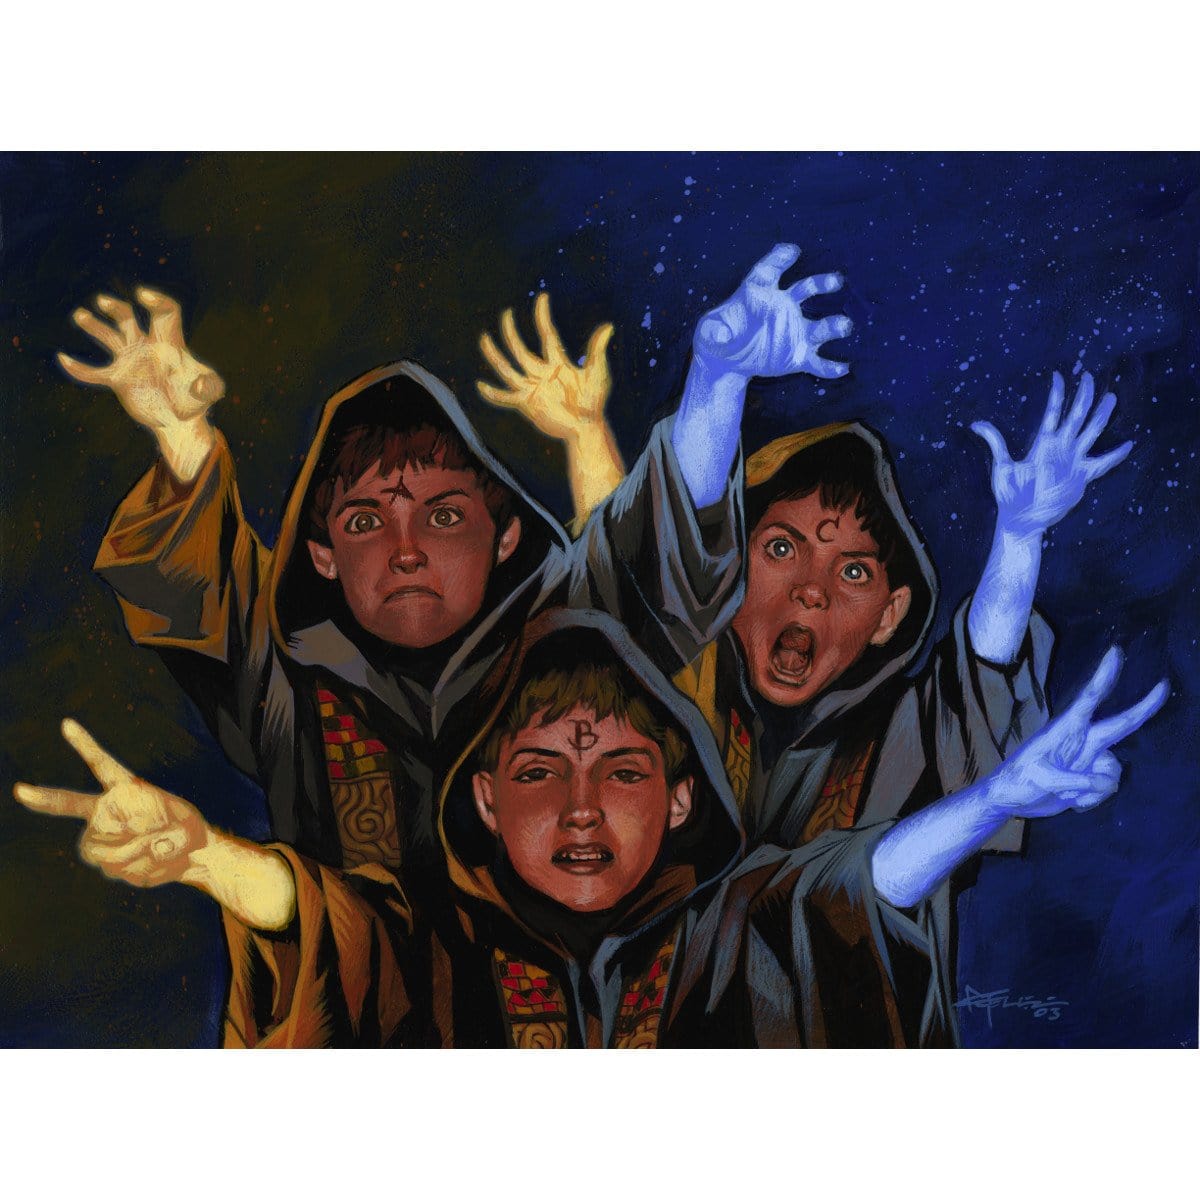 Meddling Kids Print - Print - Original Magic Art - Accessories for Magic the Gathering and other card games